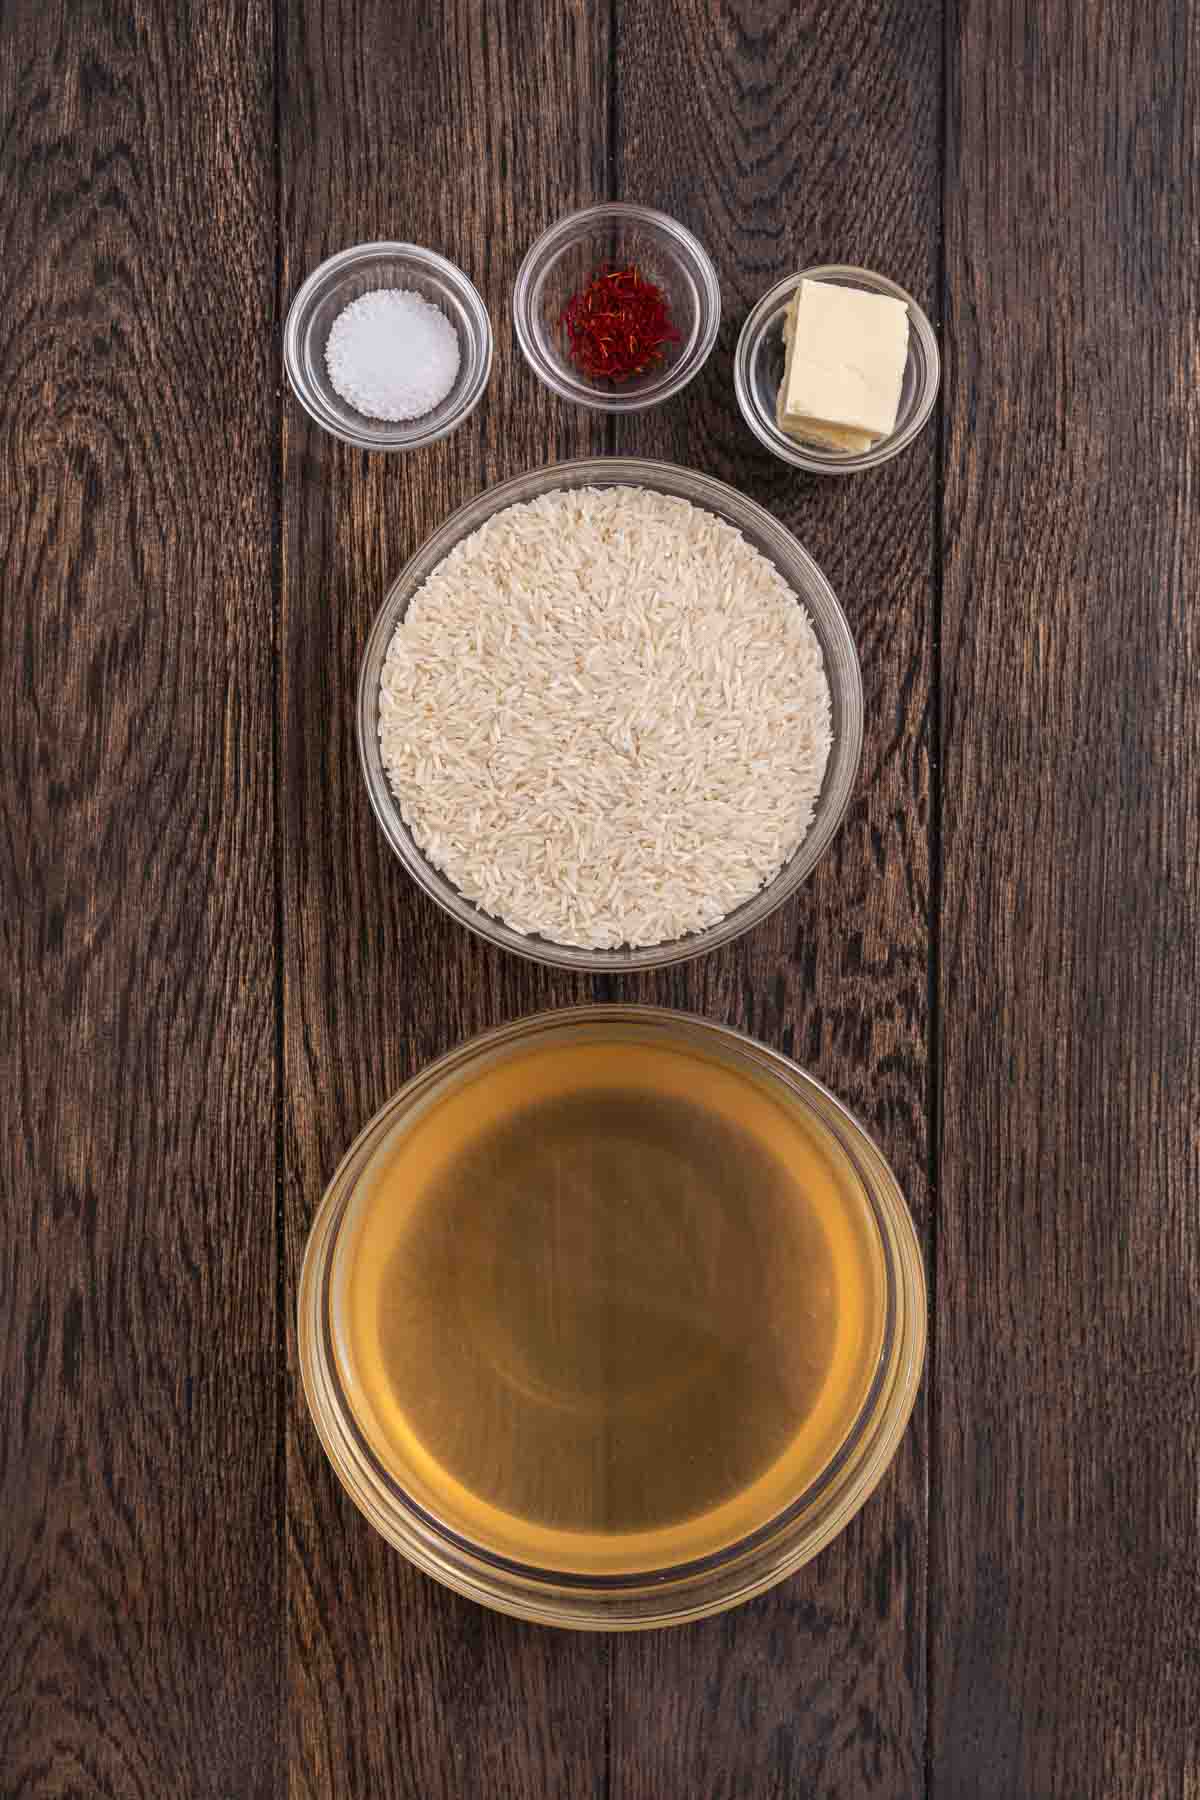 Saffron Rice ingredients laid out in separate bowls